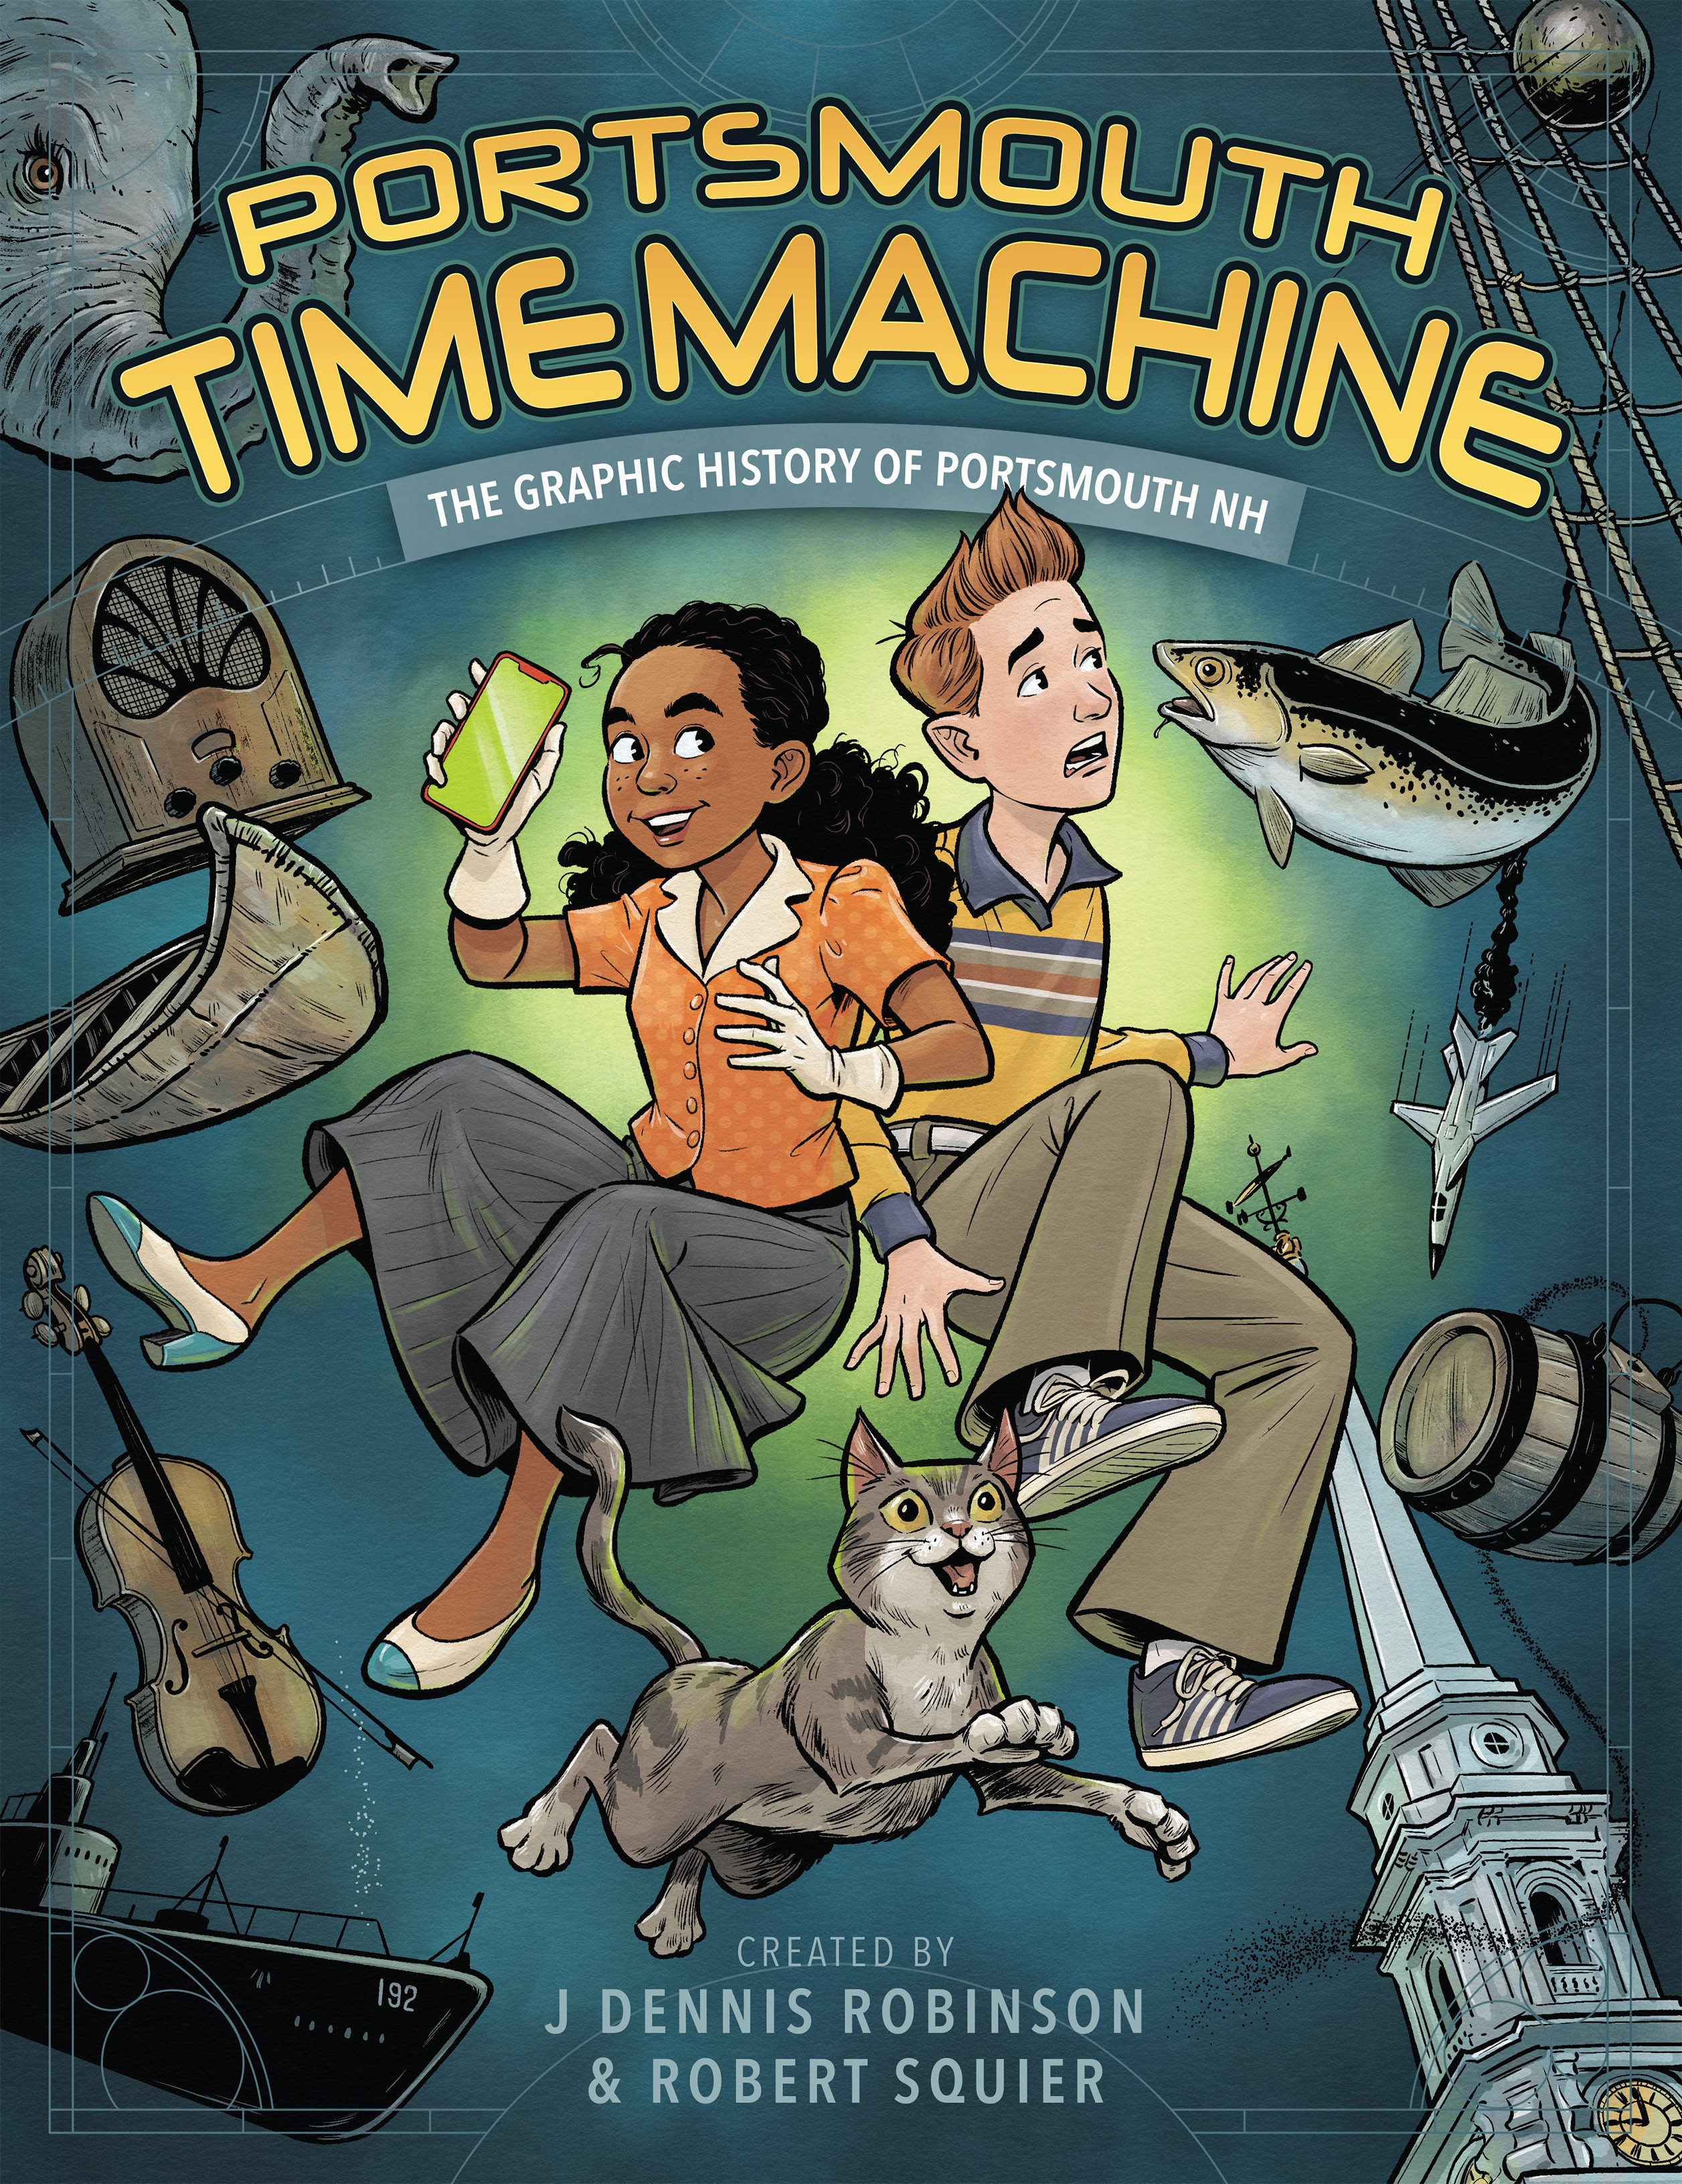 Portsmouth Time Machine A Graphic History of Portsmouth NH by Dennis Robinson and Robert Squier  Animated people trapped in a time machine